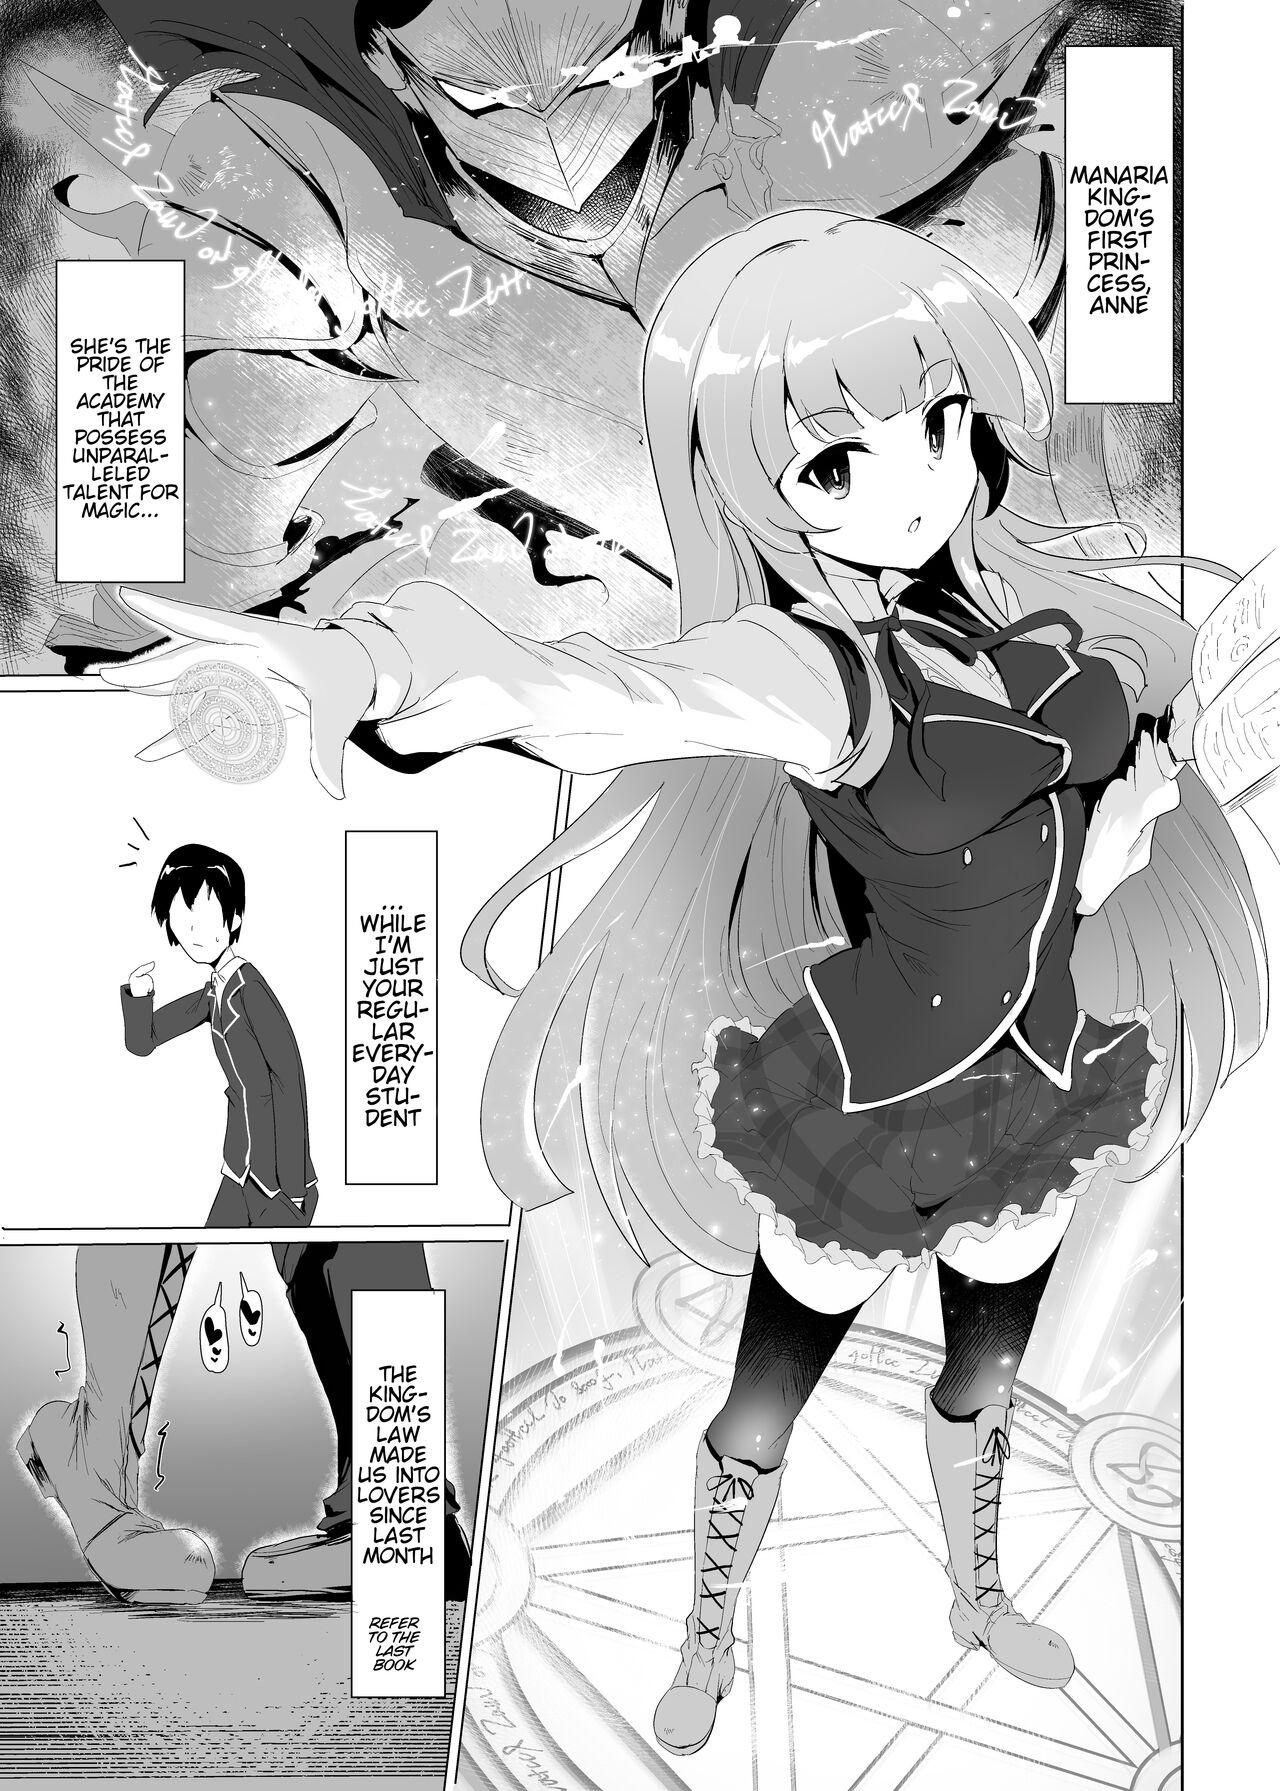 Tits There's No Way An Ecchi Event Will Happen Between Me and the Princess of Manaria Kingdom! 2 - Manaria friends Cocksuckers - Page 5